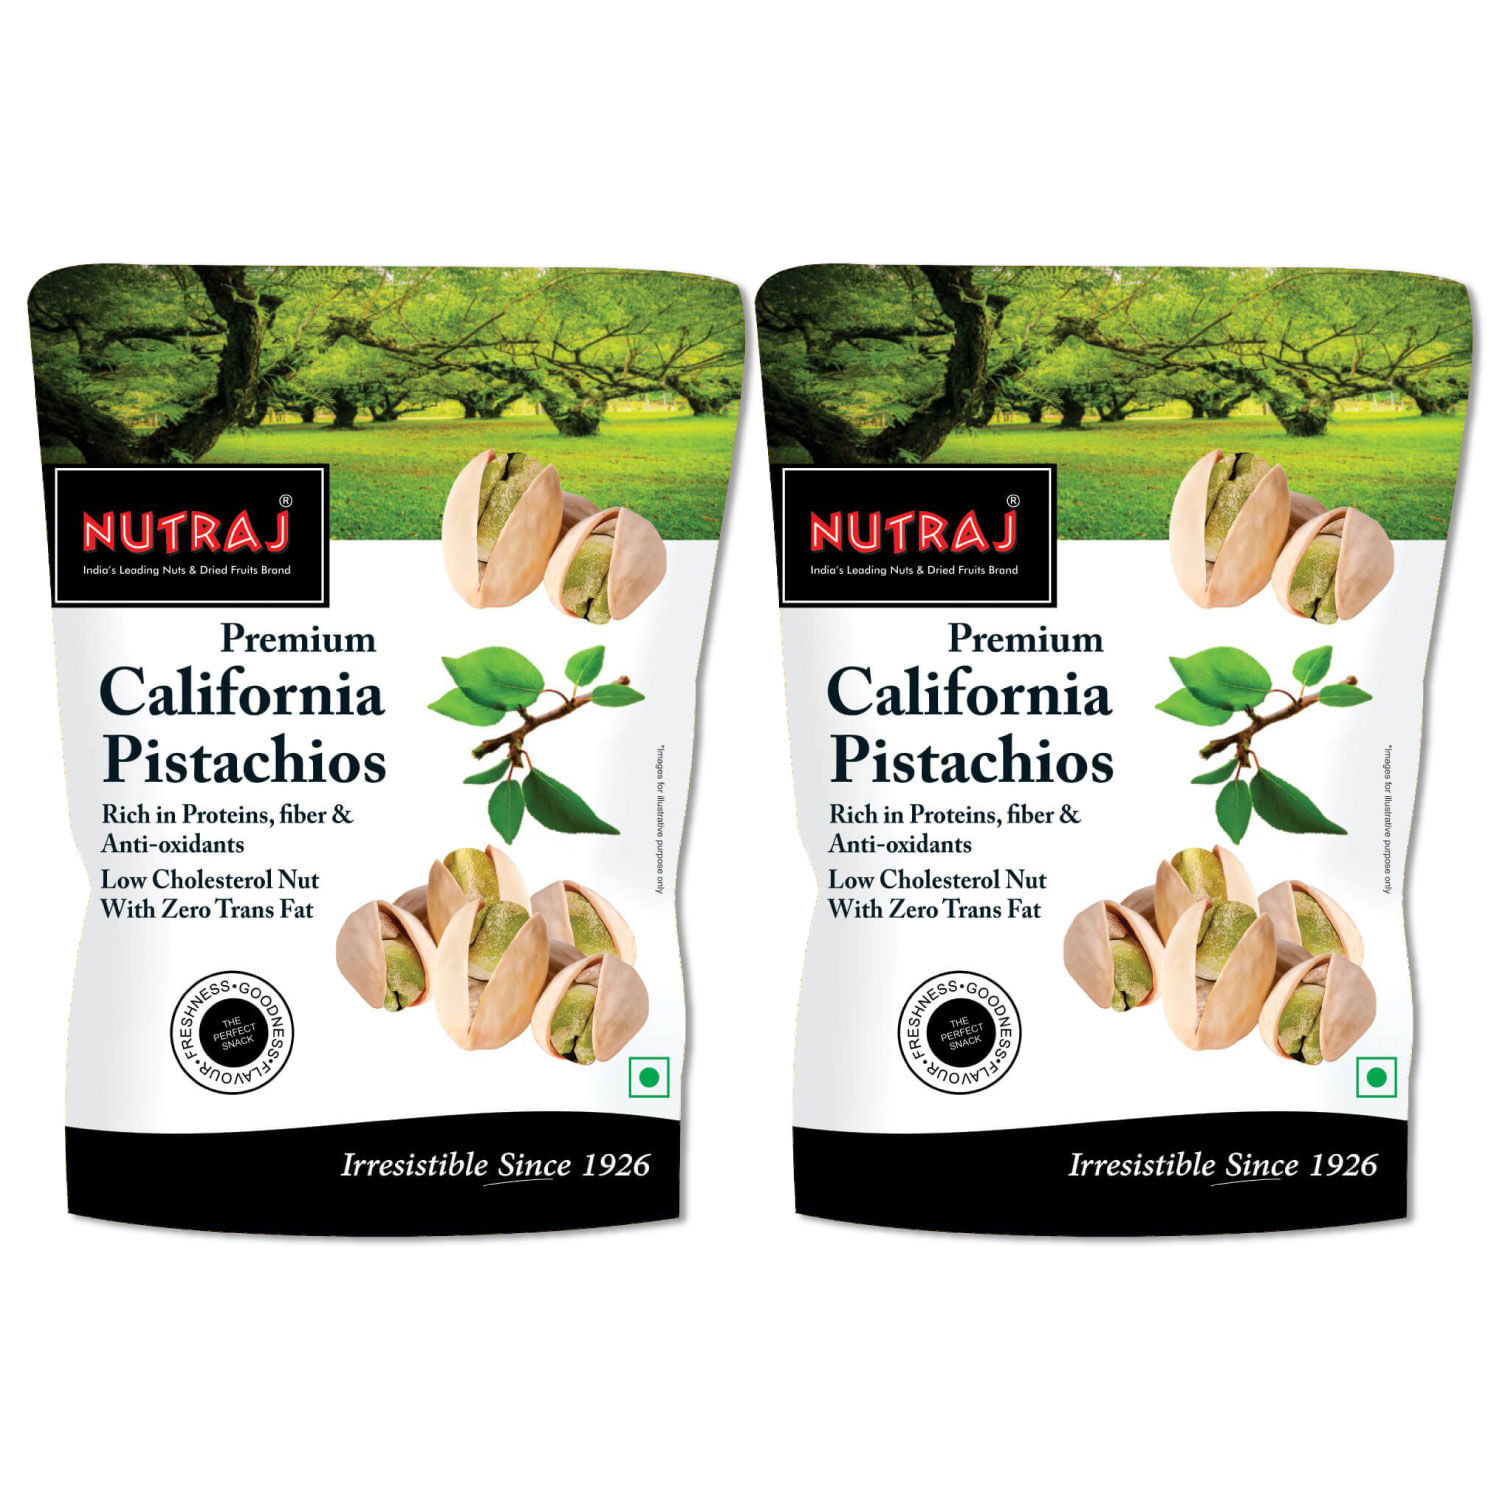 Nutraj Fard Premium Dates (500g) and Nutraj California Roasted and Salted Pistachios (500g) (2 x (250g))